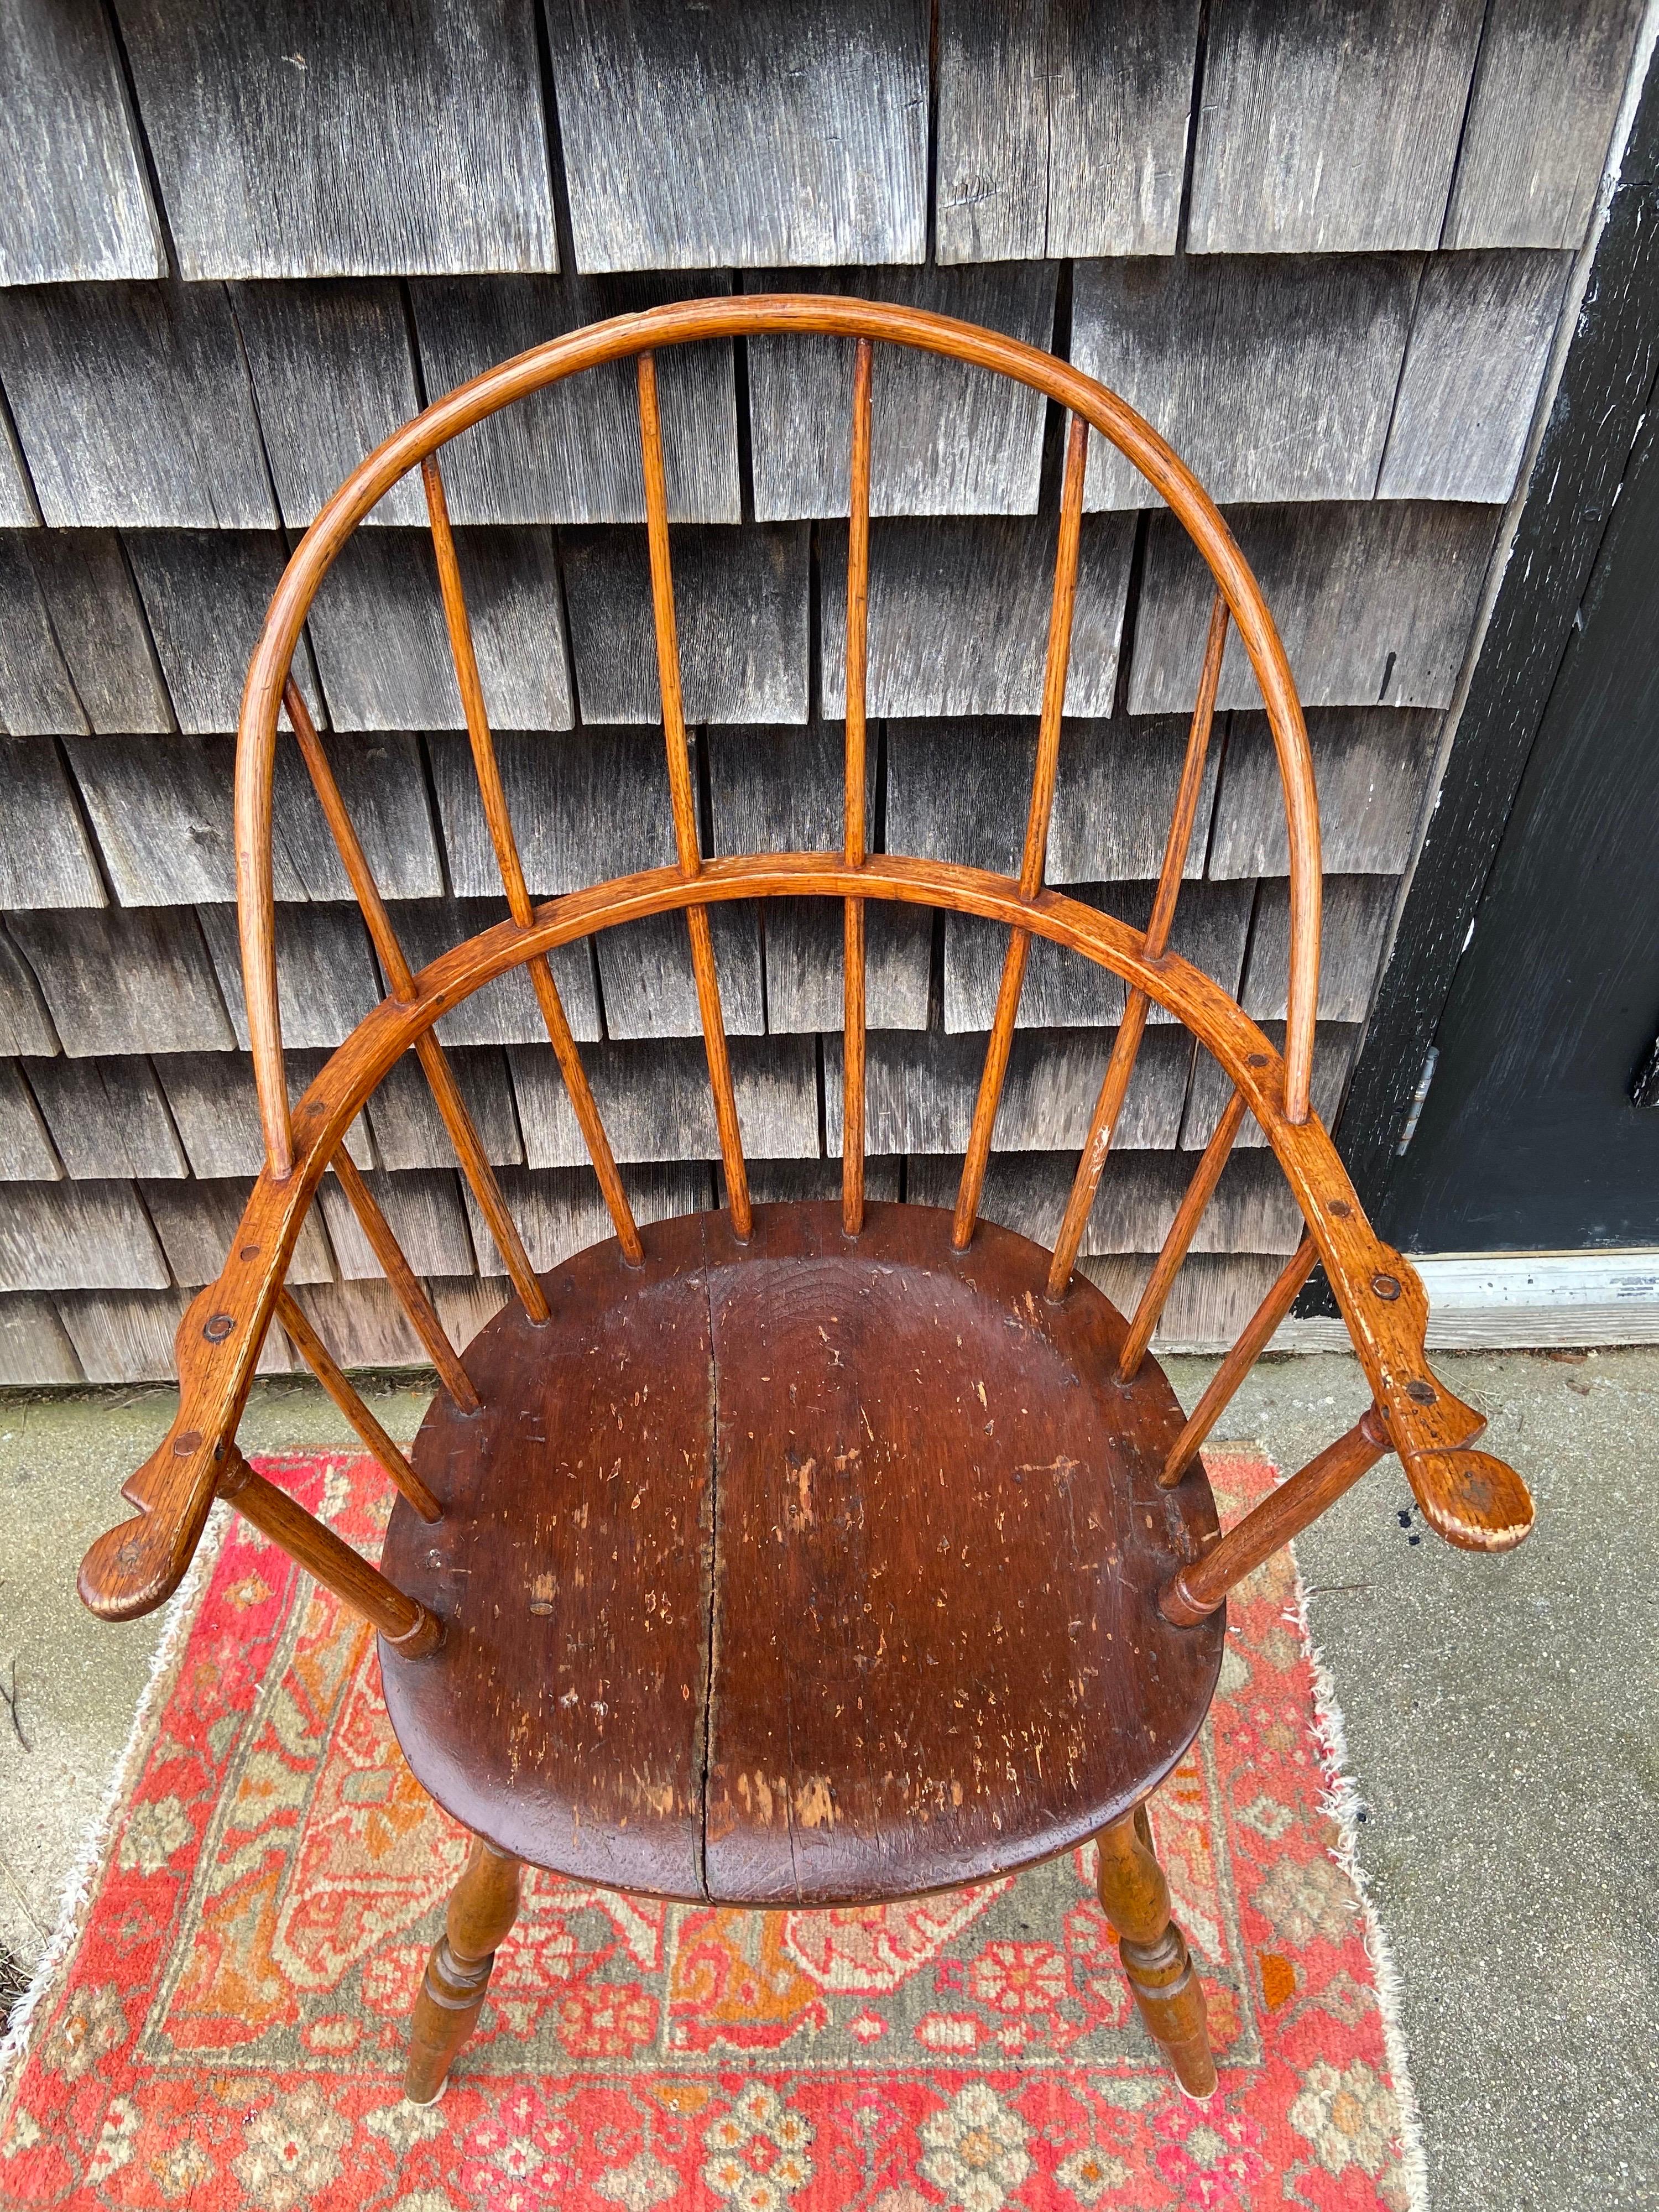 Early American Hoopback Windsor Chair, Oak and Hickory Wood 1840s, Antique Brown In Fair Condition For Sale In Vineyard Haven, MA